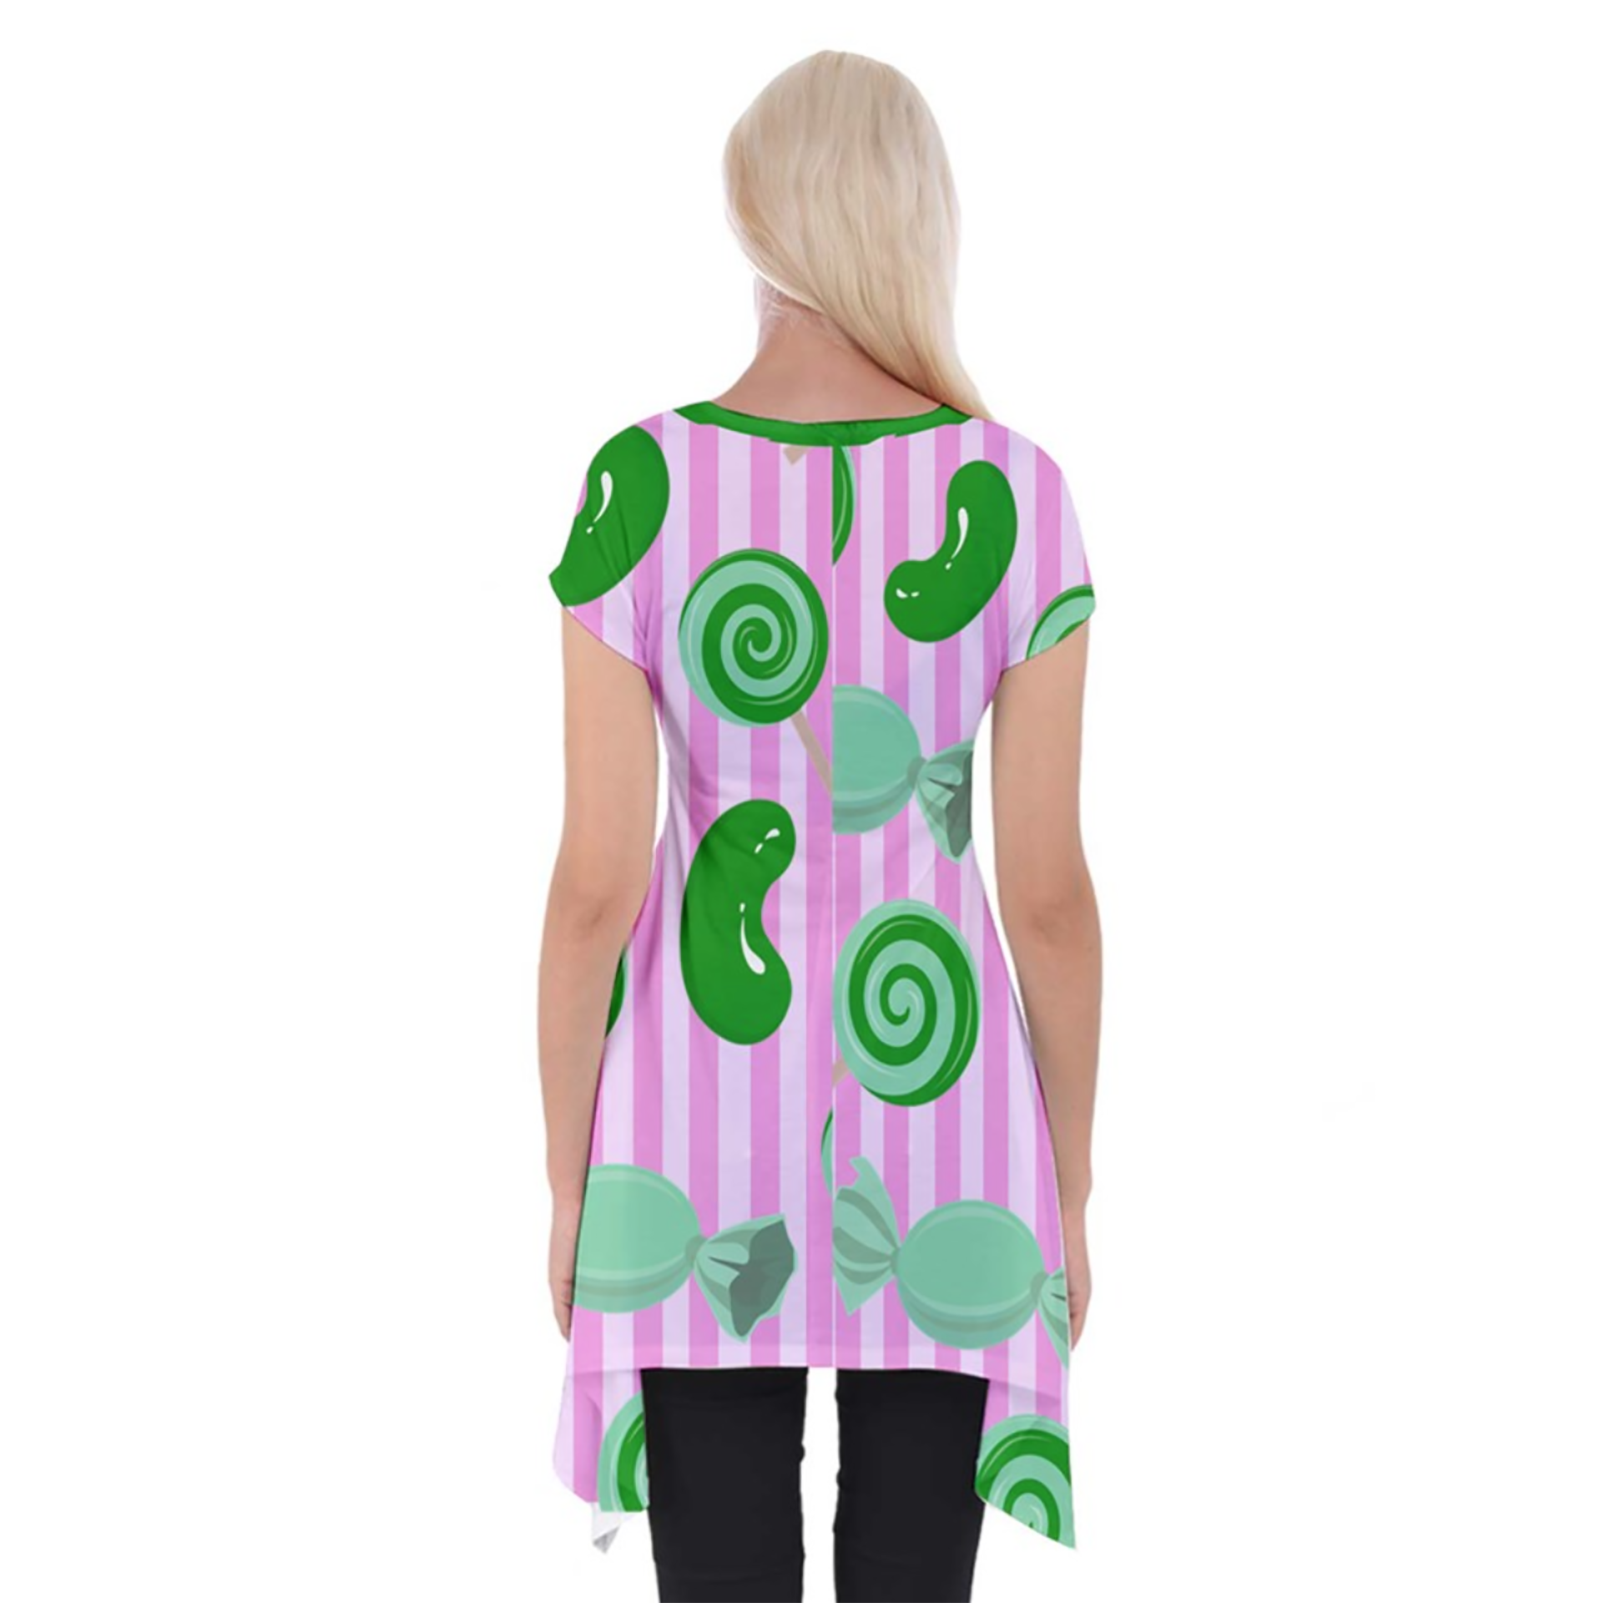 Candy Store Owl Women's Short Sleeve Side Drop Tunic (candy pattern)